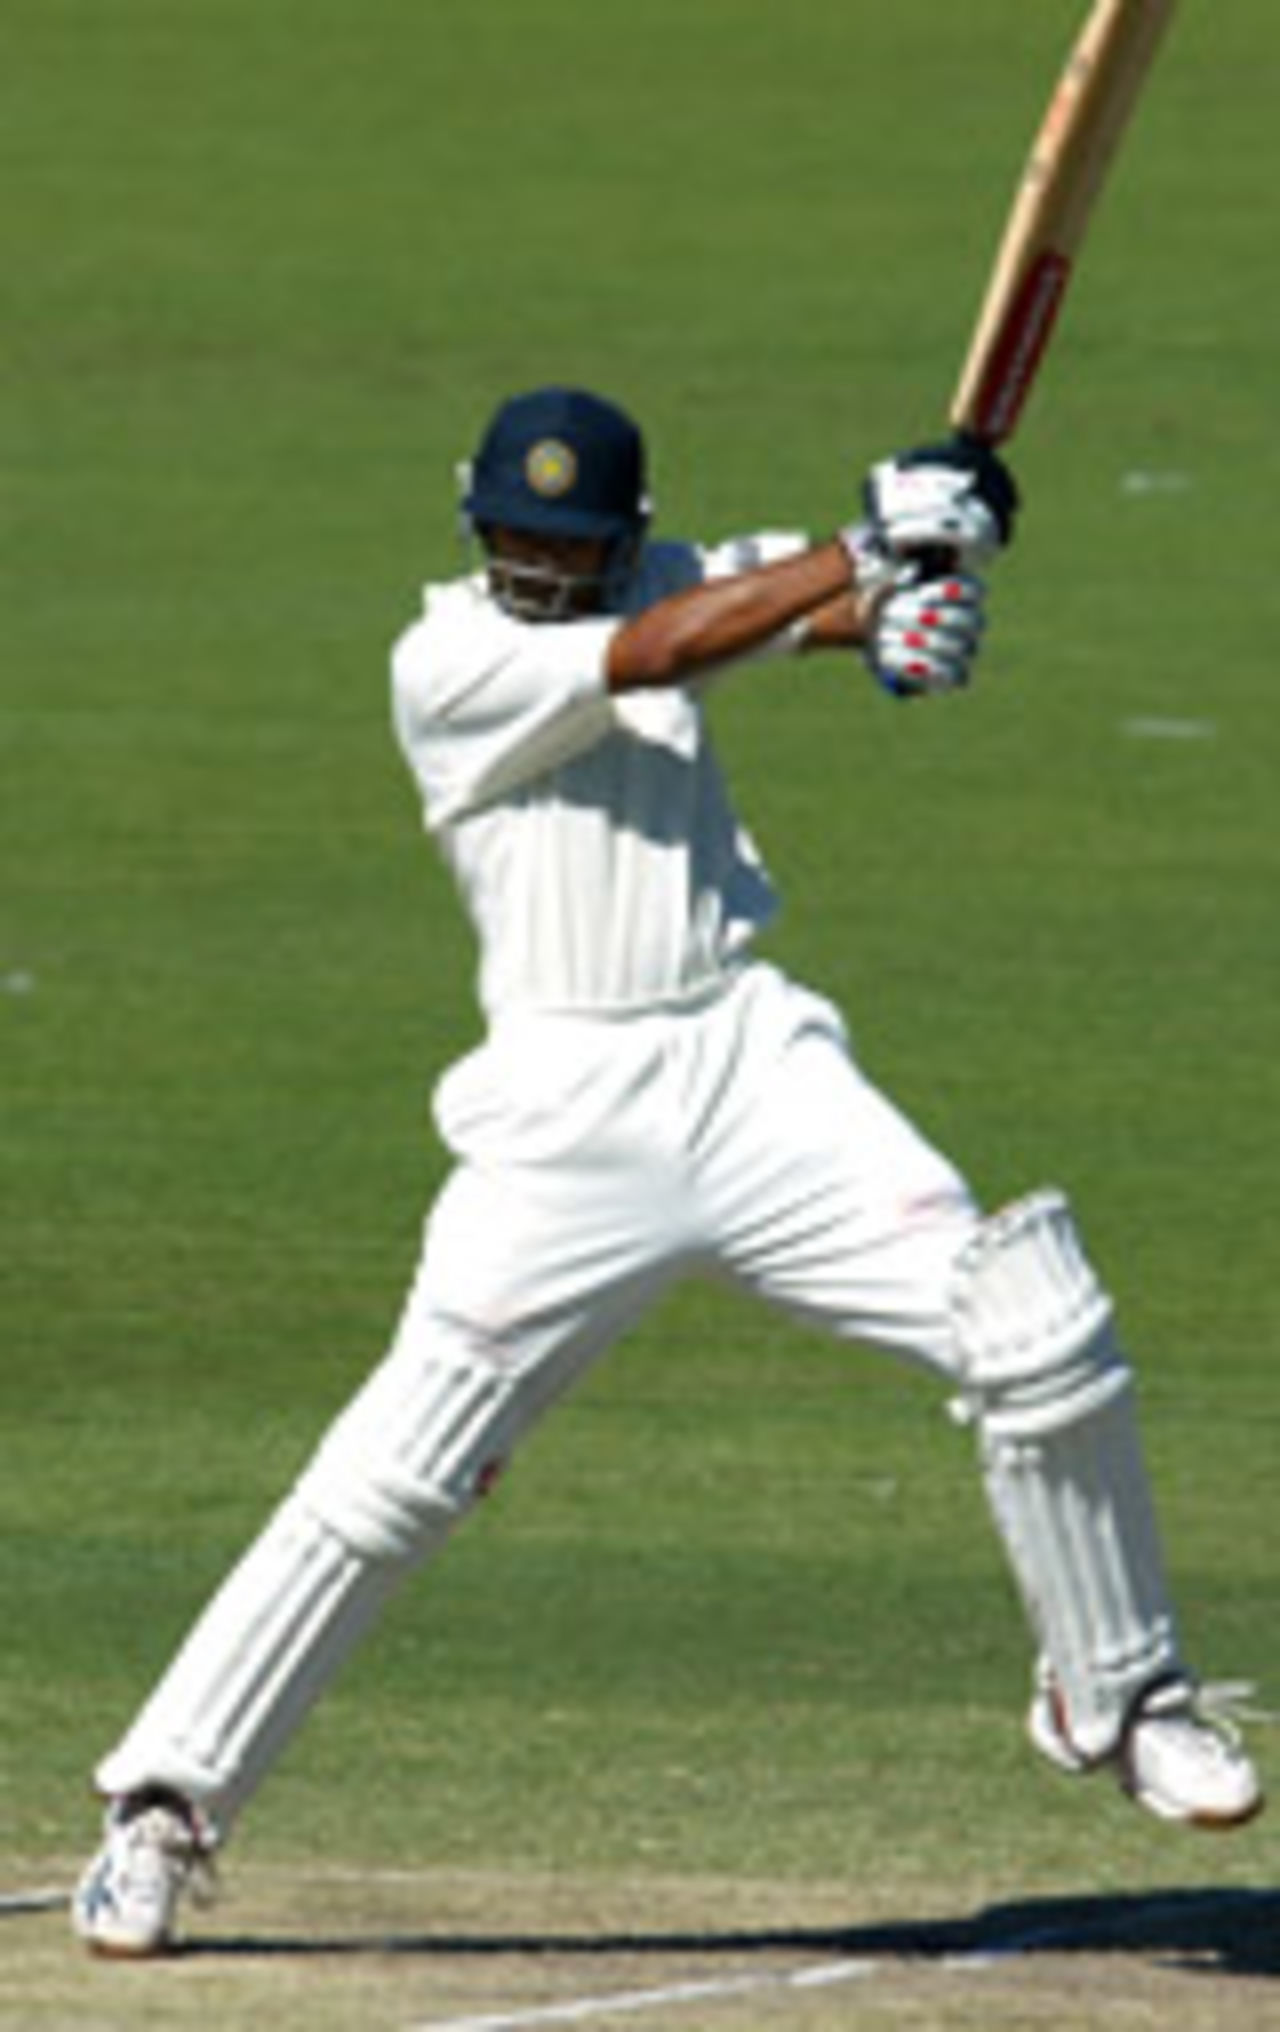 Rahul Dravid square cuts, Australia v India, 2nd Test, Adelaide, 3rd day, December 14, 2003